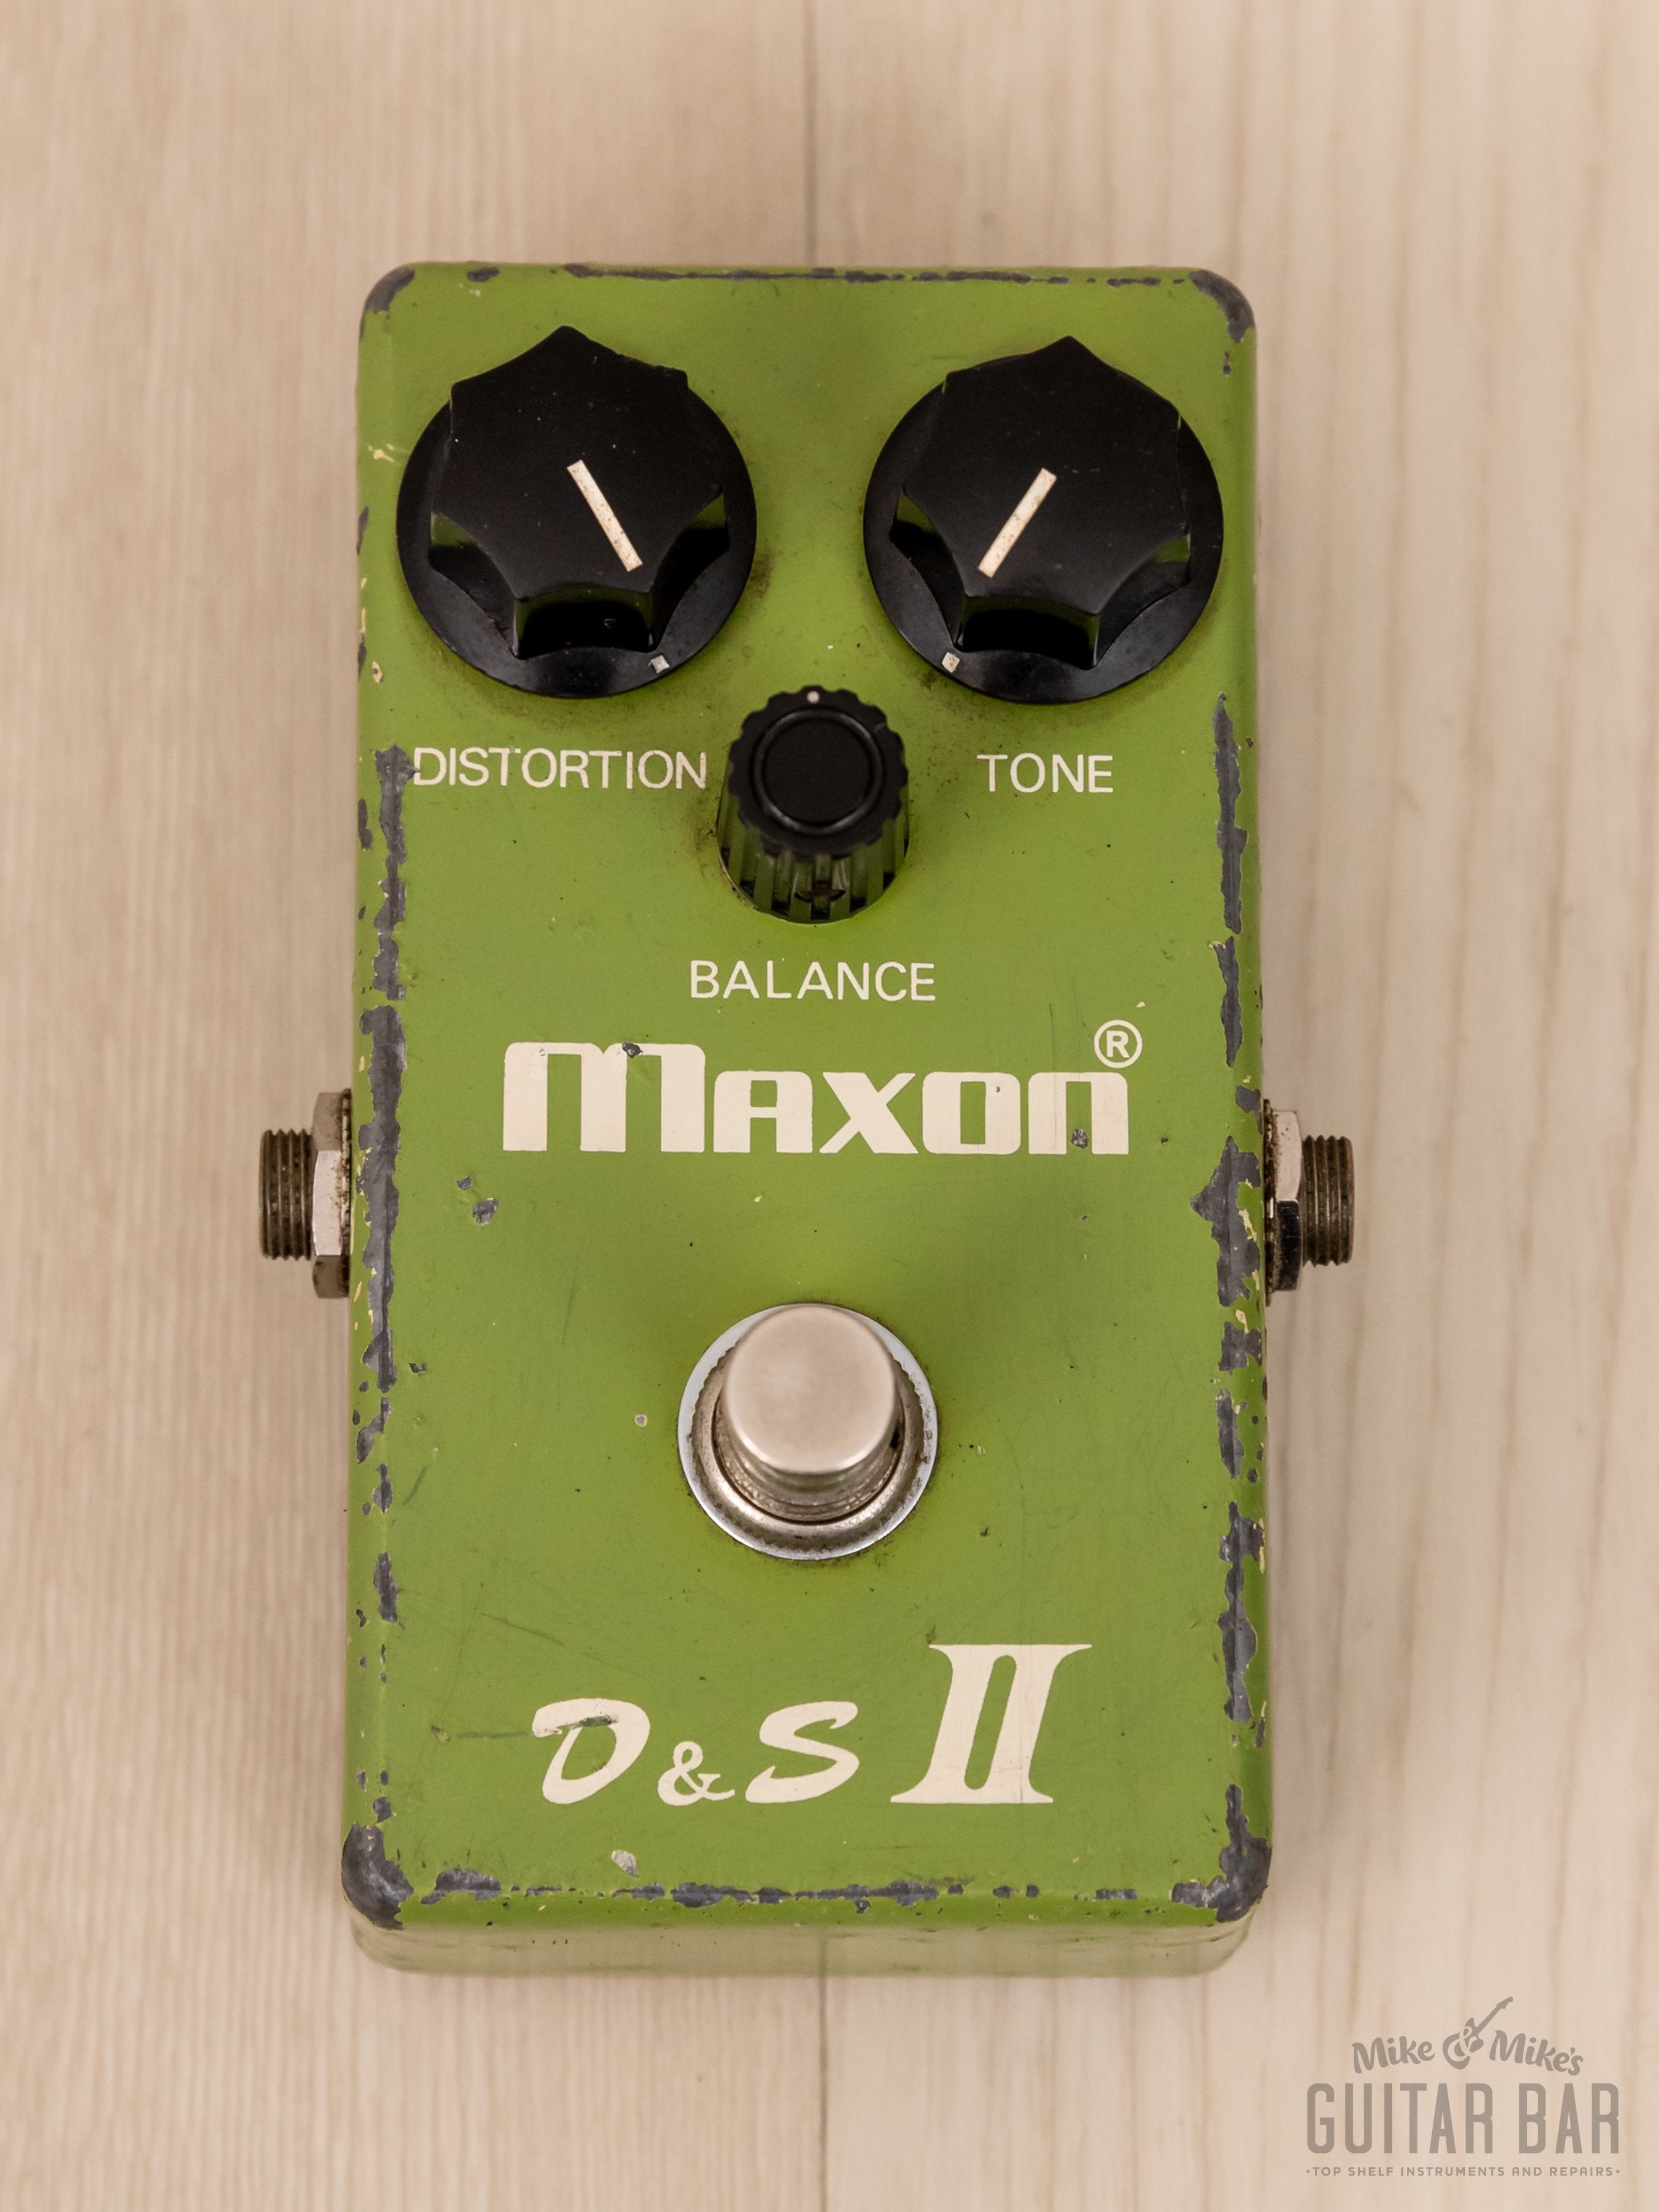 1970s Maxon D&S II Distortion Sustainer Vintage Overdrive Guitar Effects Pedal w/ Box